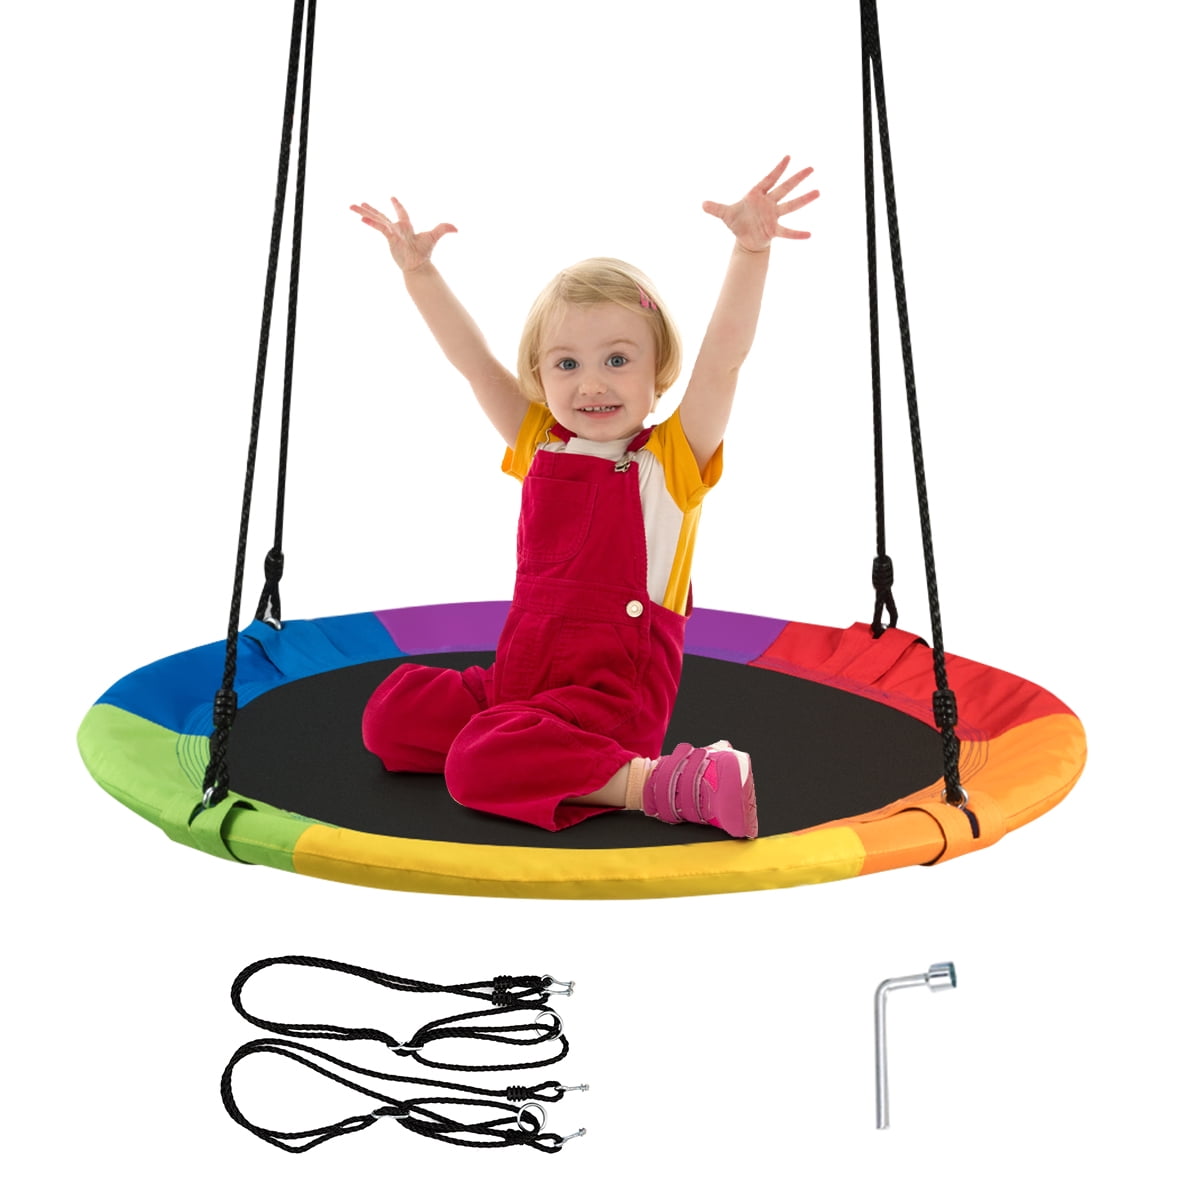 40" Flying Saucer Tree Swing Nest 700 lbs Children's Colorful Swing Easy Install 